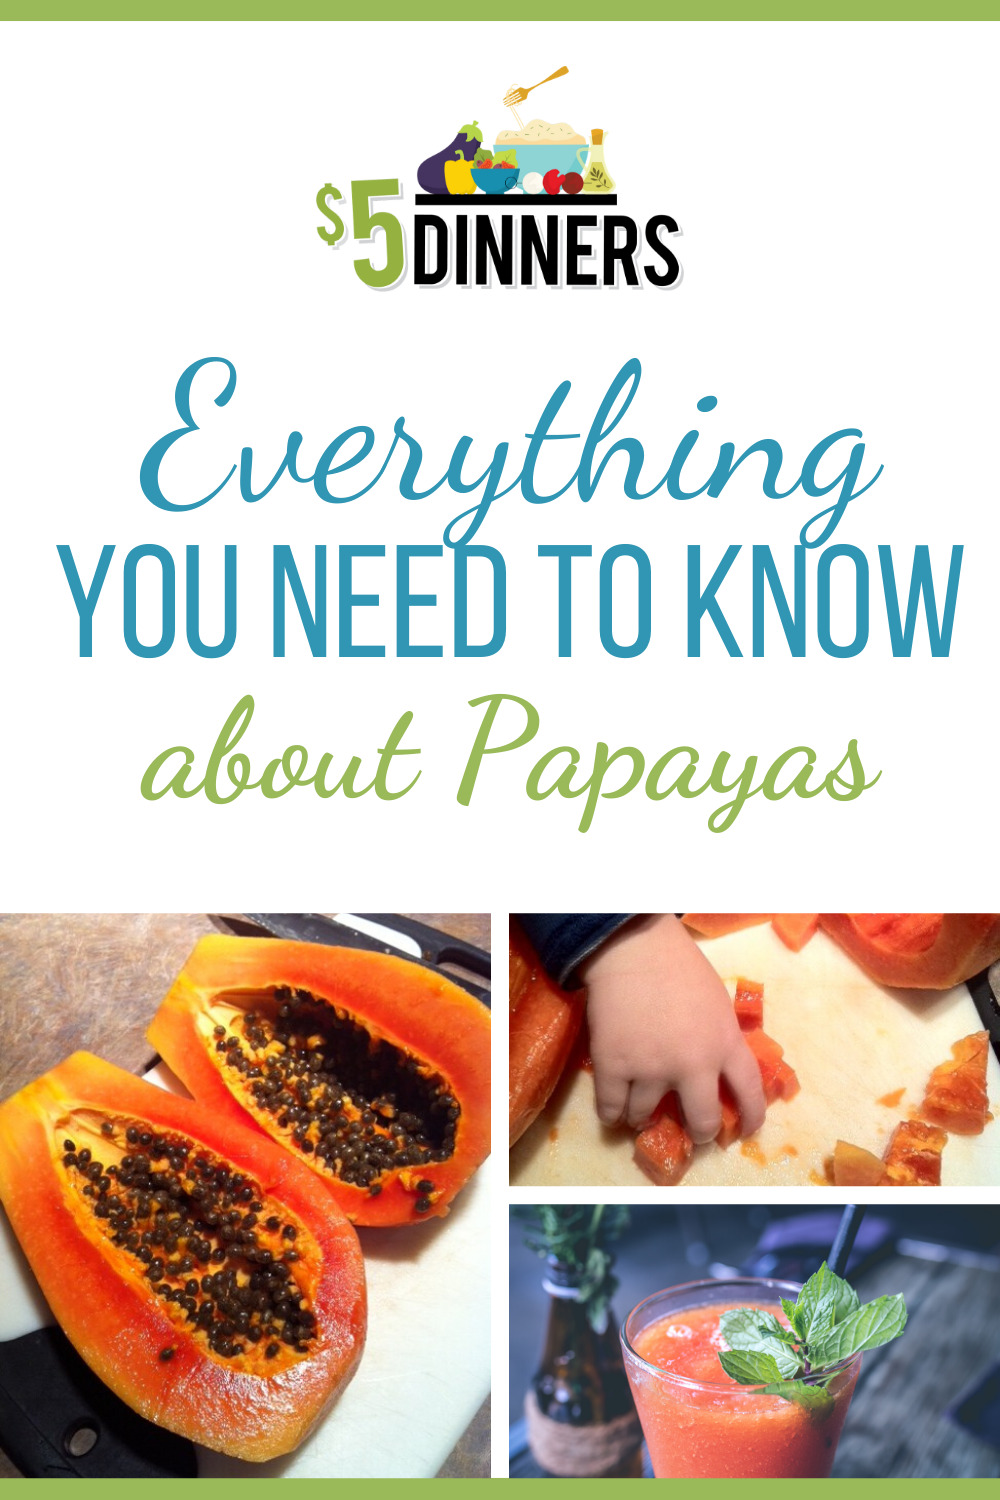 everything you need to know about papayas $5 dinners